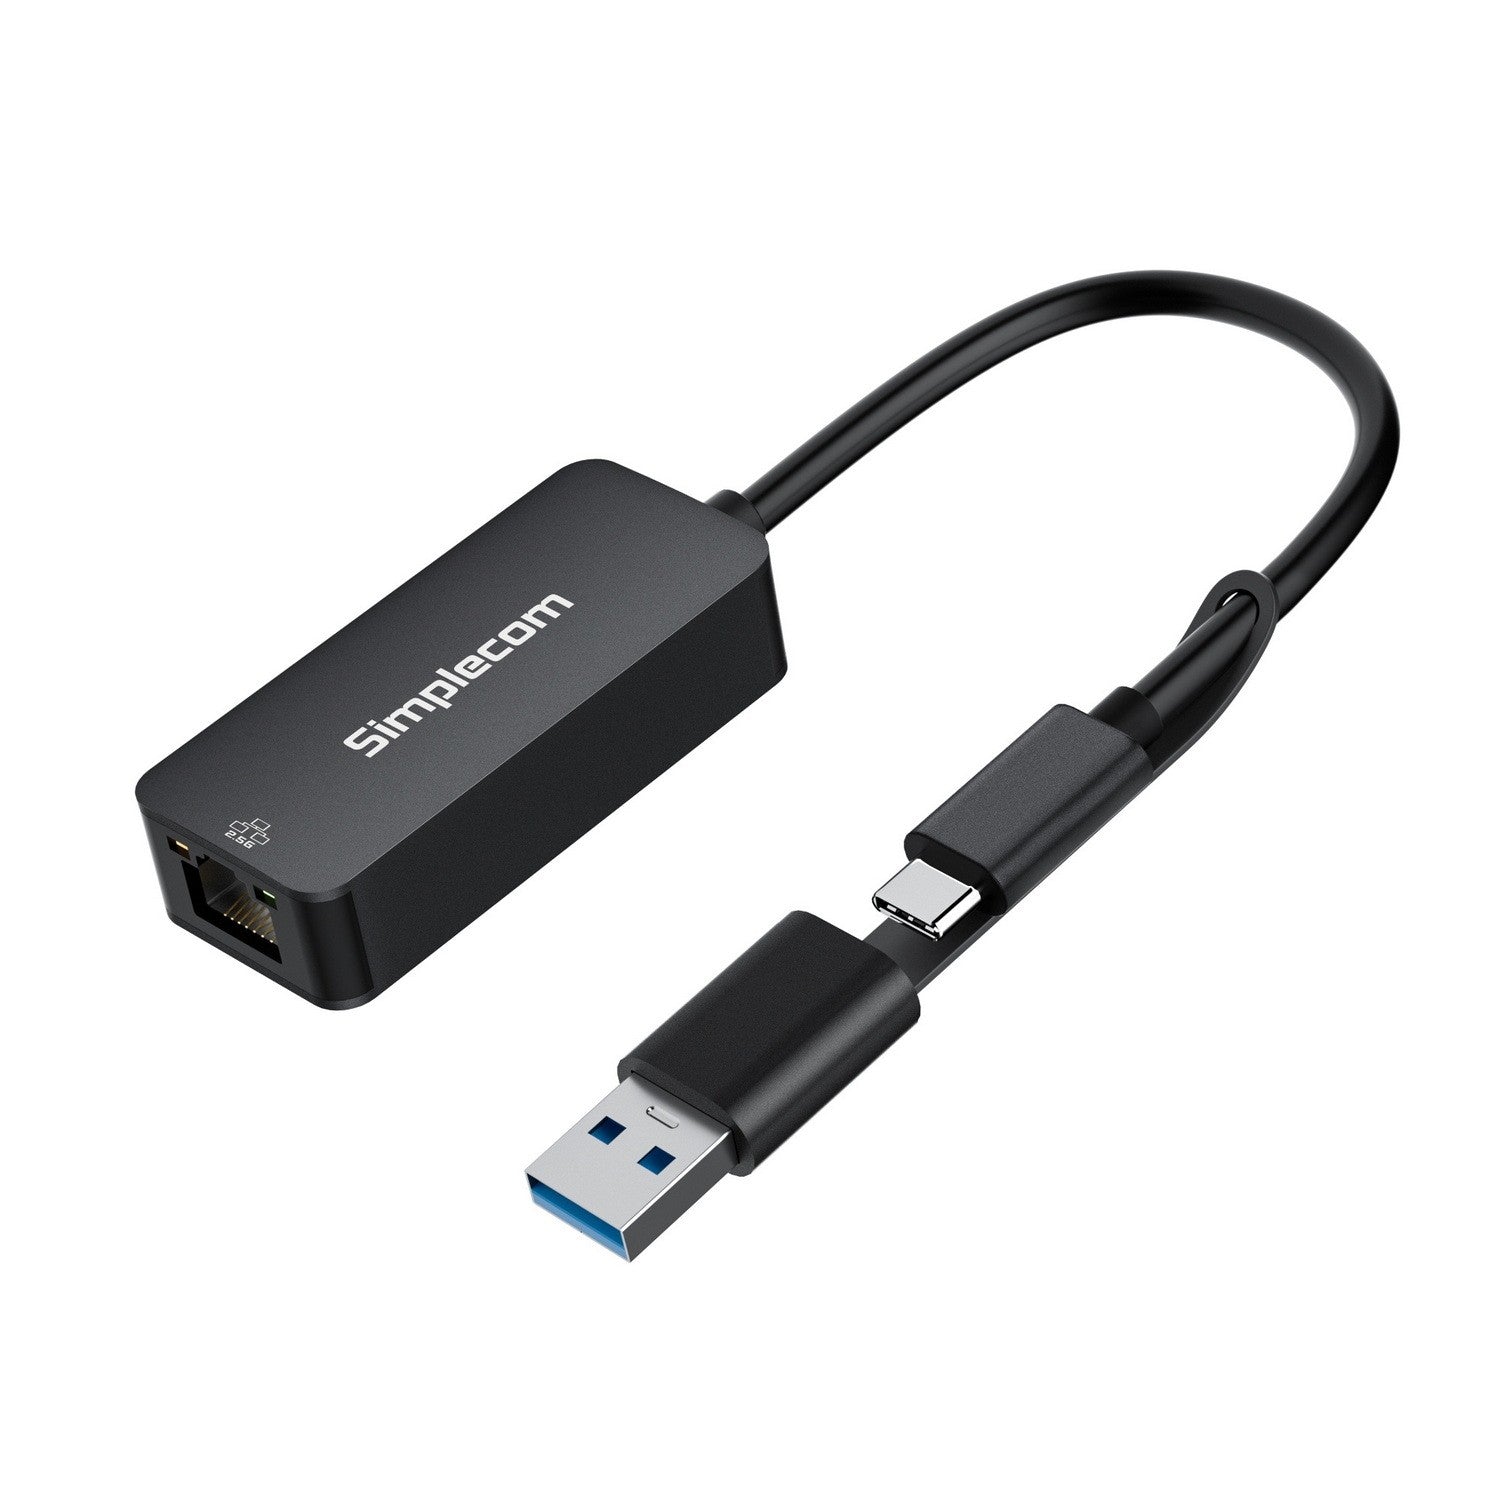 Simplecom 2 in 1 USB-C to RJ45 Superspeed 2.5Gbps Network Adapter